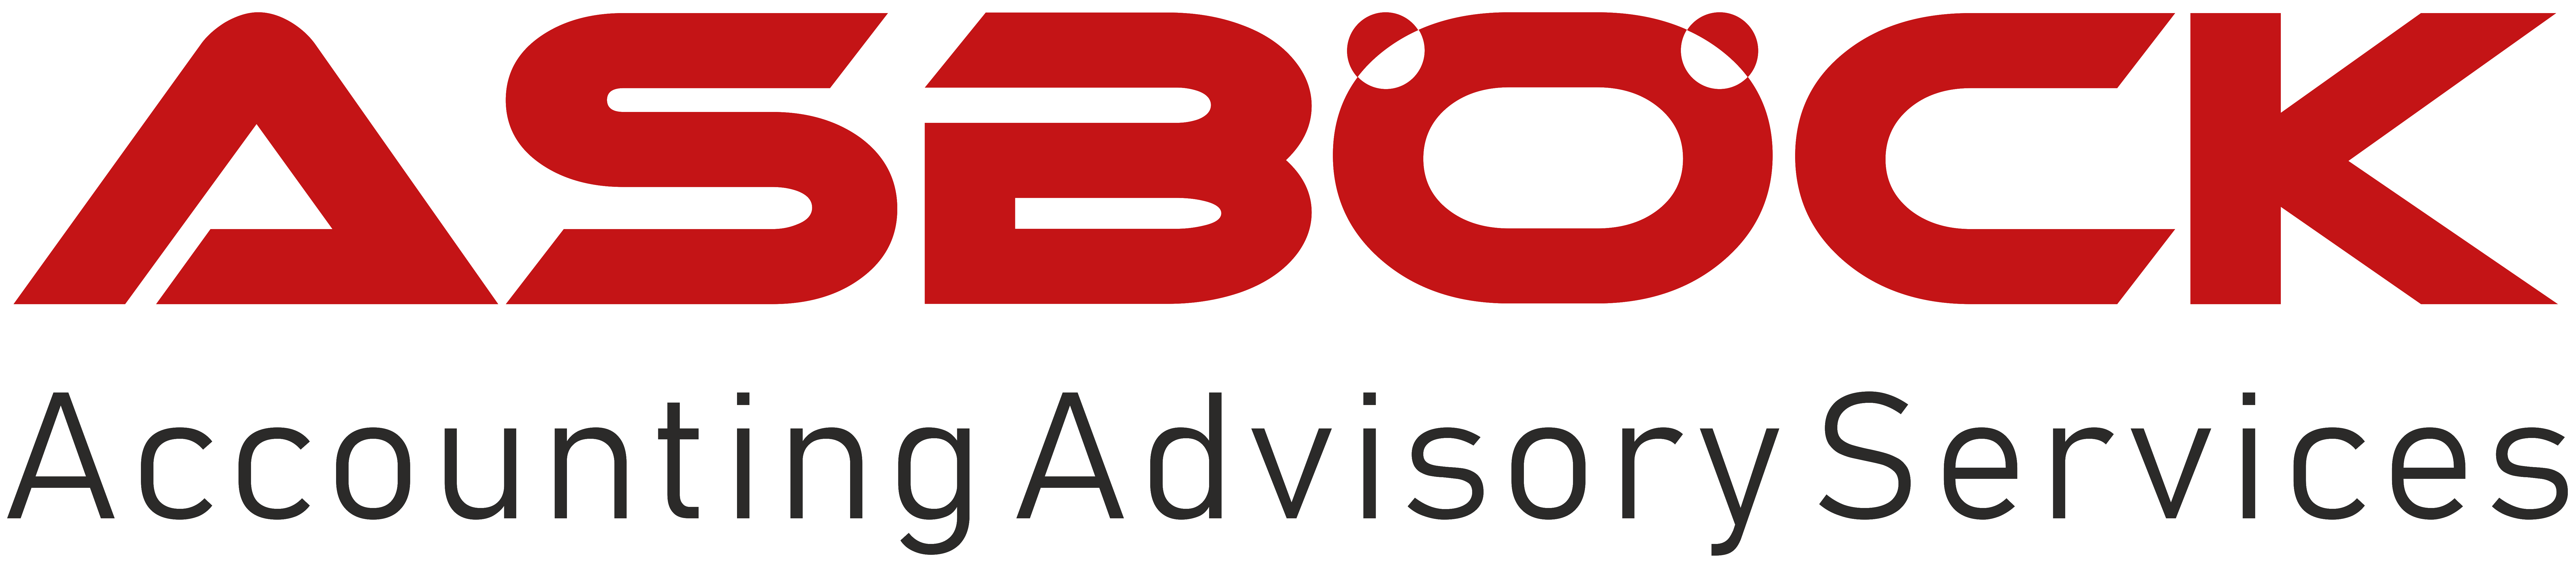 ASBÖCK Accounting Advisory Services